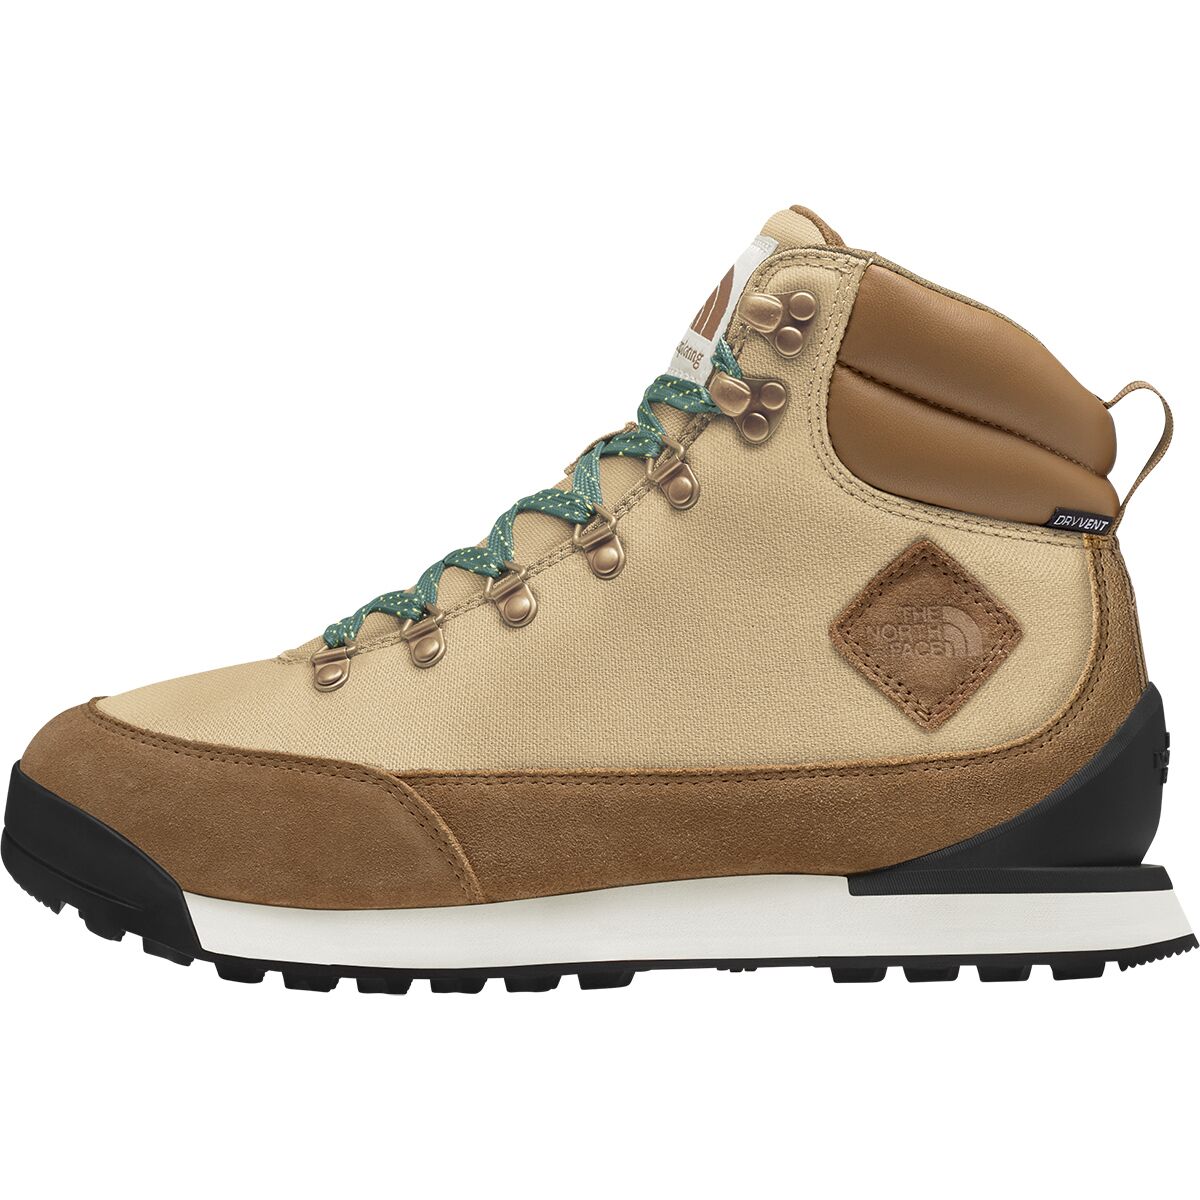 The North Face Back-To-Berkeley IV Textile WP Boot - Women's